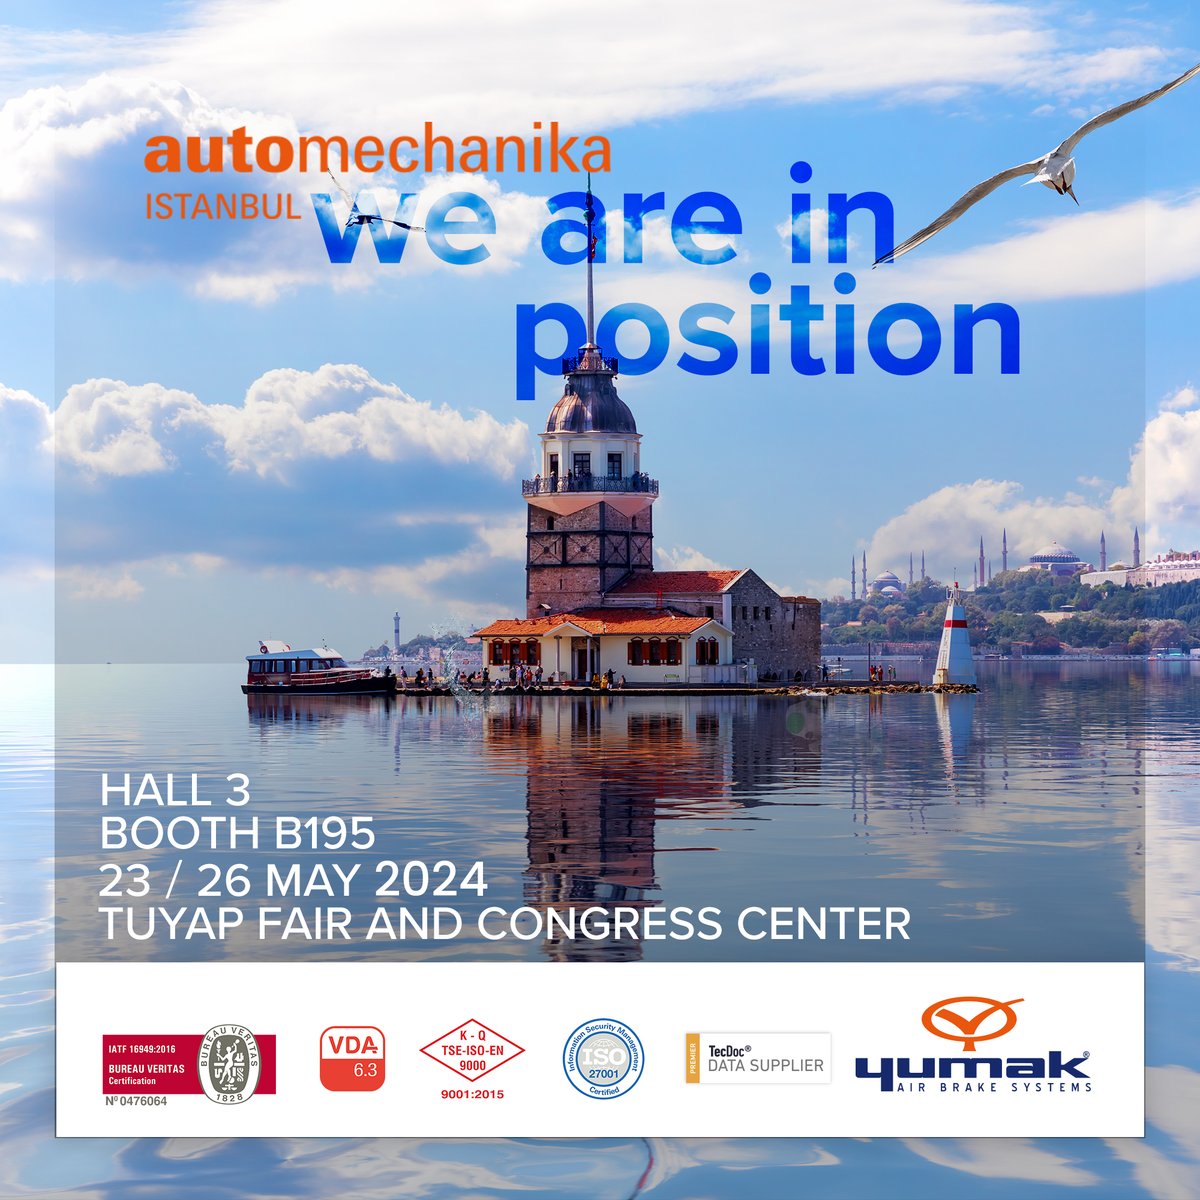 You are invited to meet Yumak world. We will be waiting for you at Automechanika Istanbul. HALL: 3 STAND: B195 23 - 26 MAY 2024 #yumakairbrakesystem #automechanika #automechanikaistanbul #airbrake #compressor #airbrakecompressor #wabco #knorrbremse #sparepart #truck #design